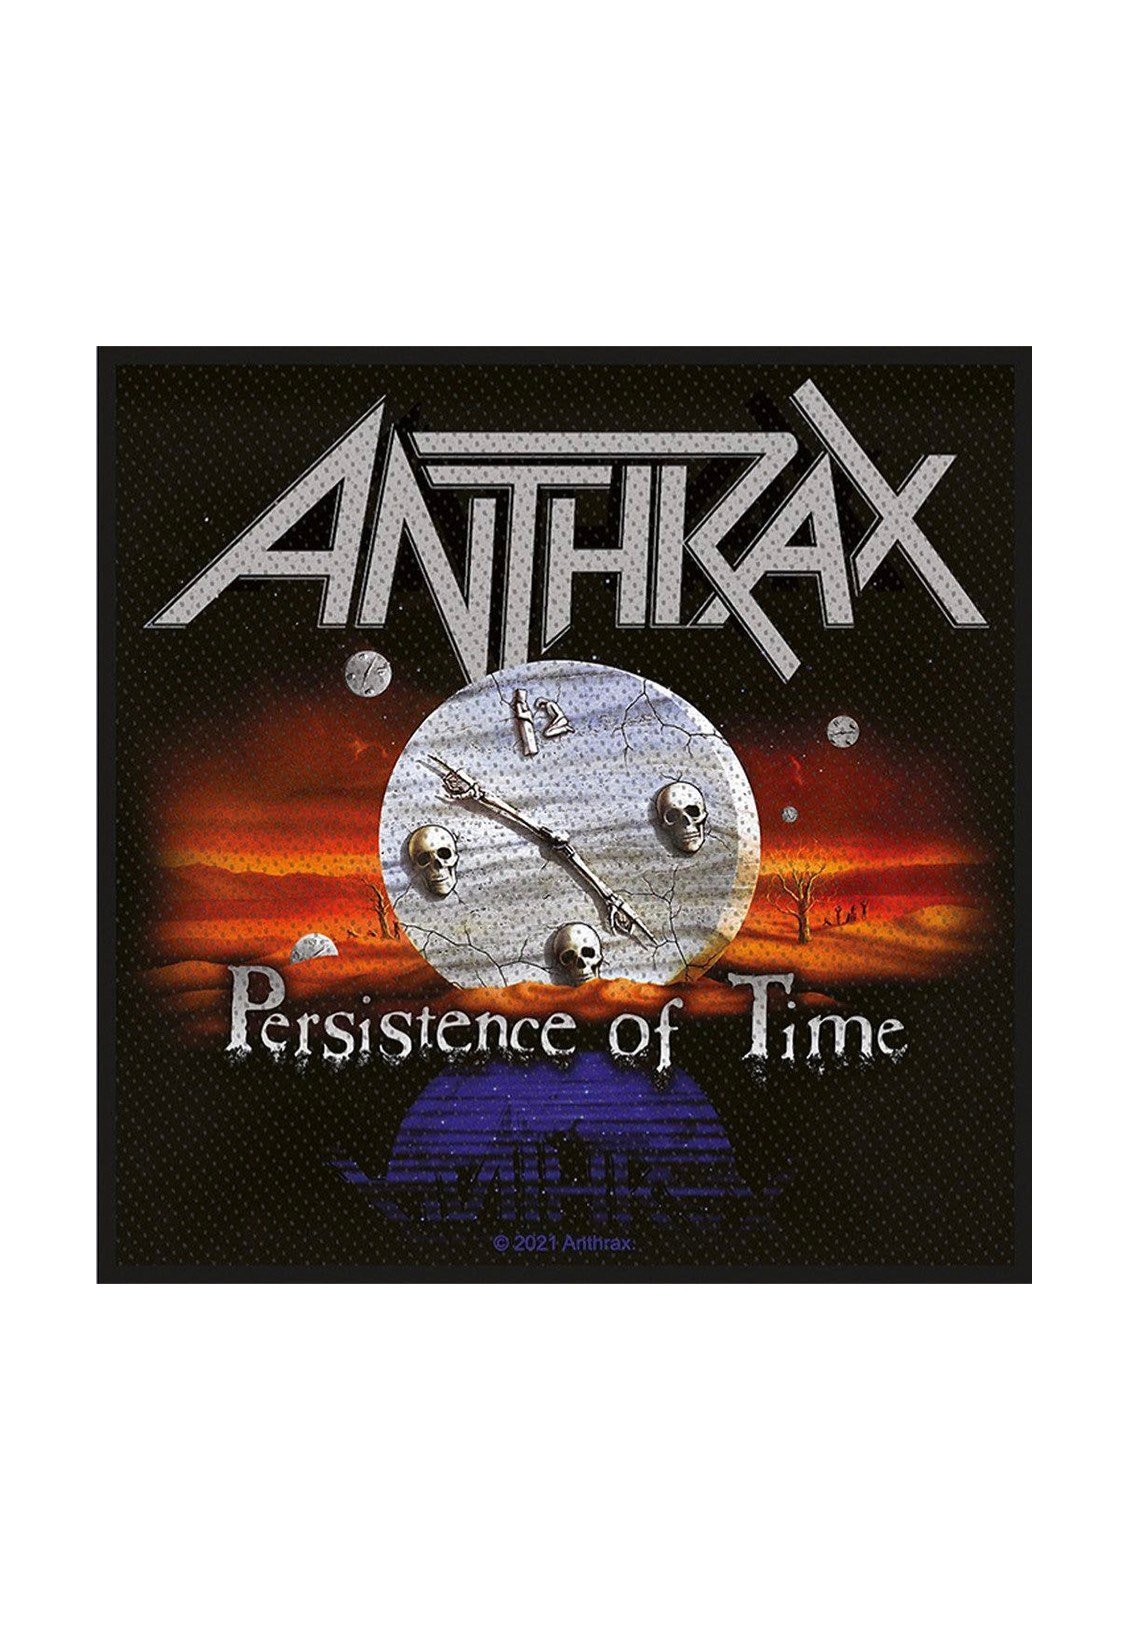 Anthrax - Persistence Of Time - Patch